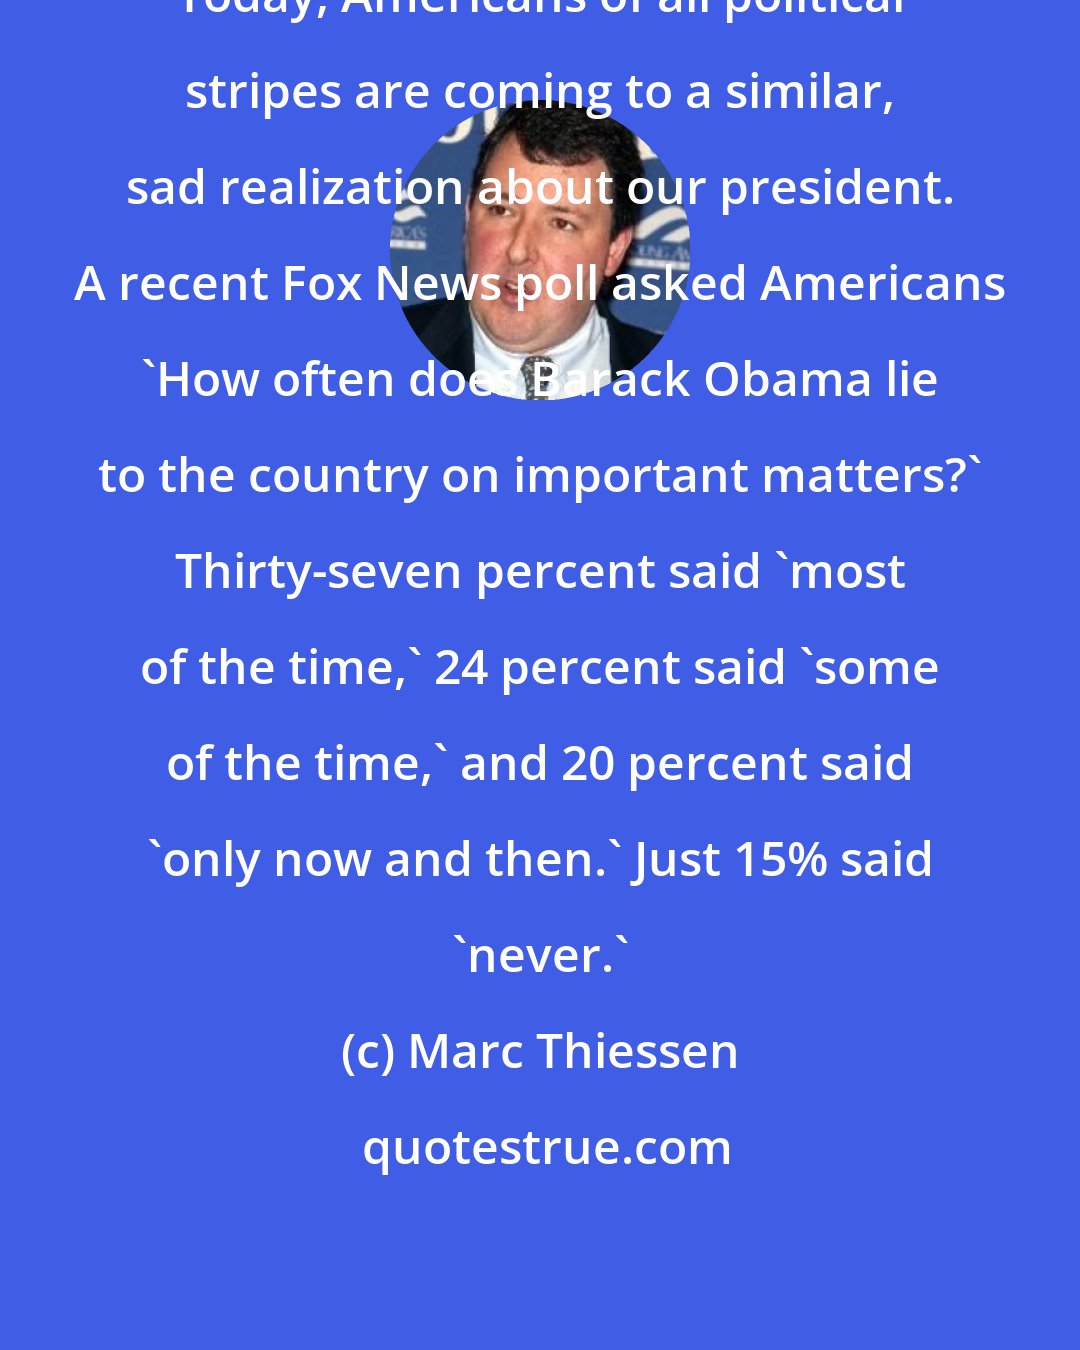 Marc Thiessen: Today, Americans of all political stripes are coming to a similar, sad realization about our president. A recent Fox News poll asked Americans 'How often does Barack Obama lie to the country on important matters?' Thirty-seven percent said 'most of the time,' 24 percent said 'some of the time,' and 20 percent said 'only now and then.' Just 15% said 'never.'